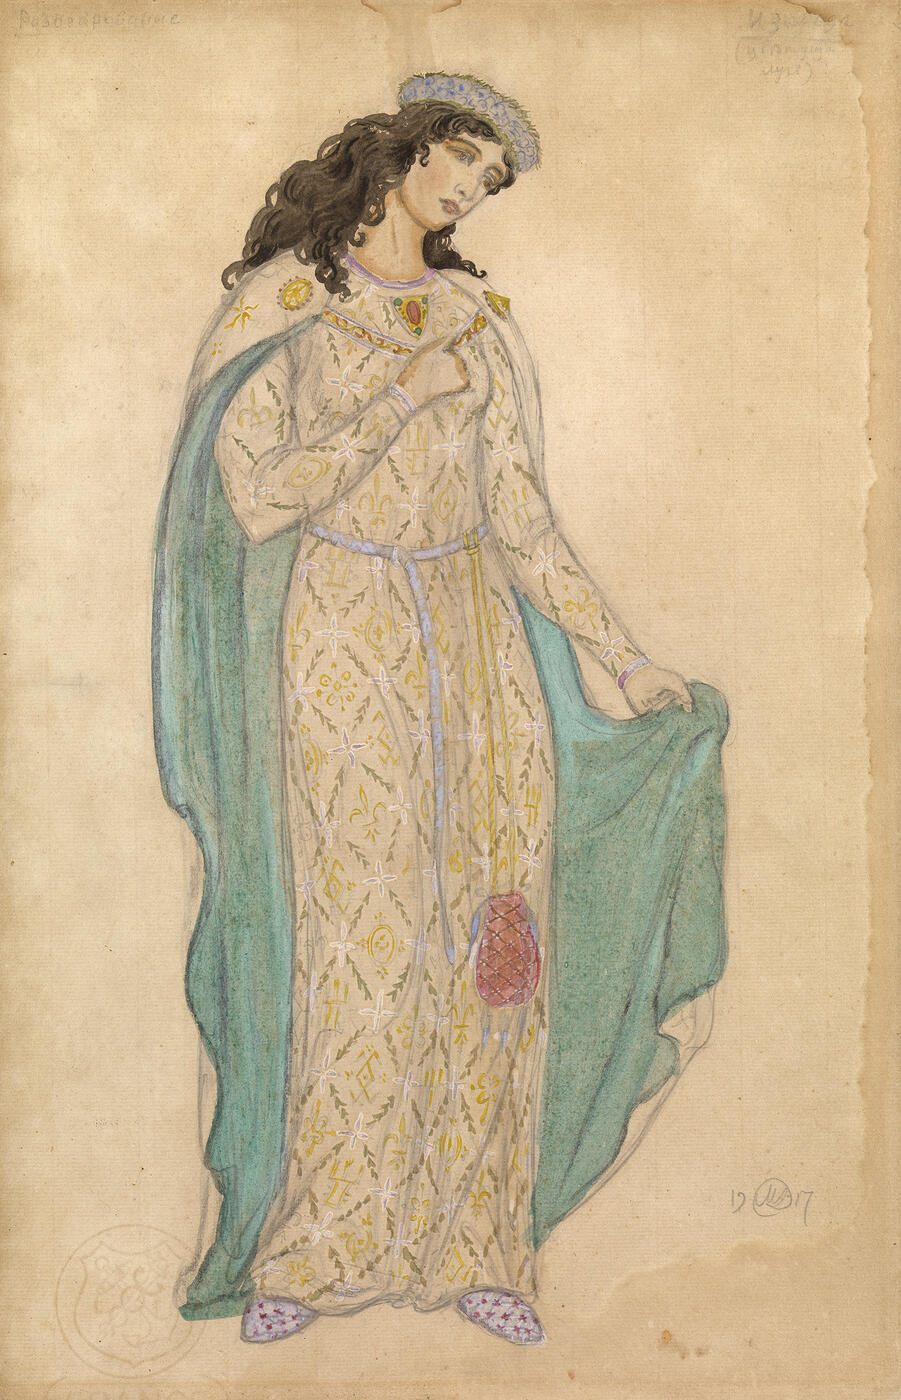 Isolde, Costume Design for R. Wagner’s Opera “Tristan and Isolde”